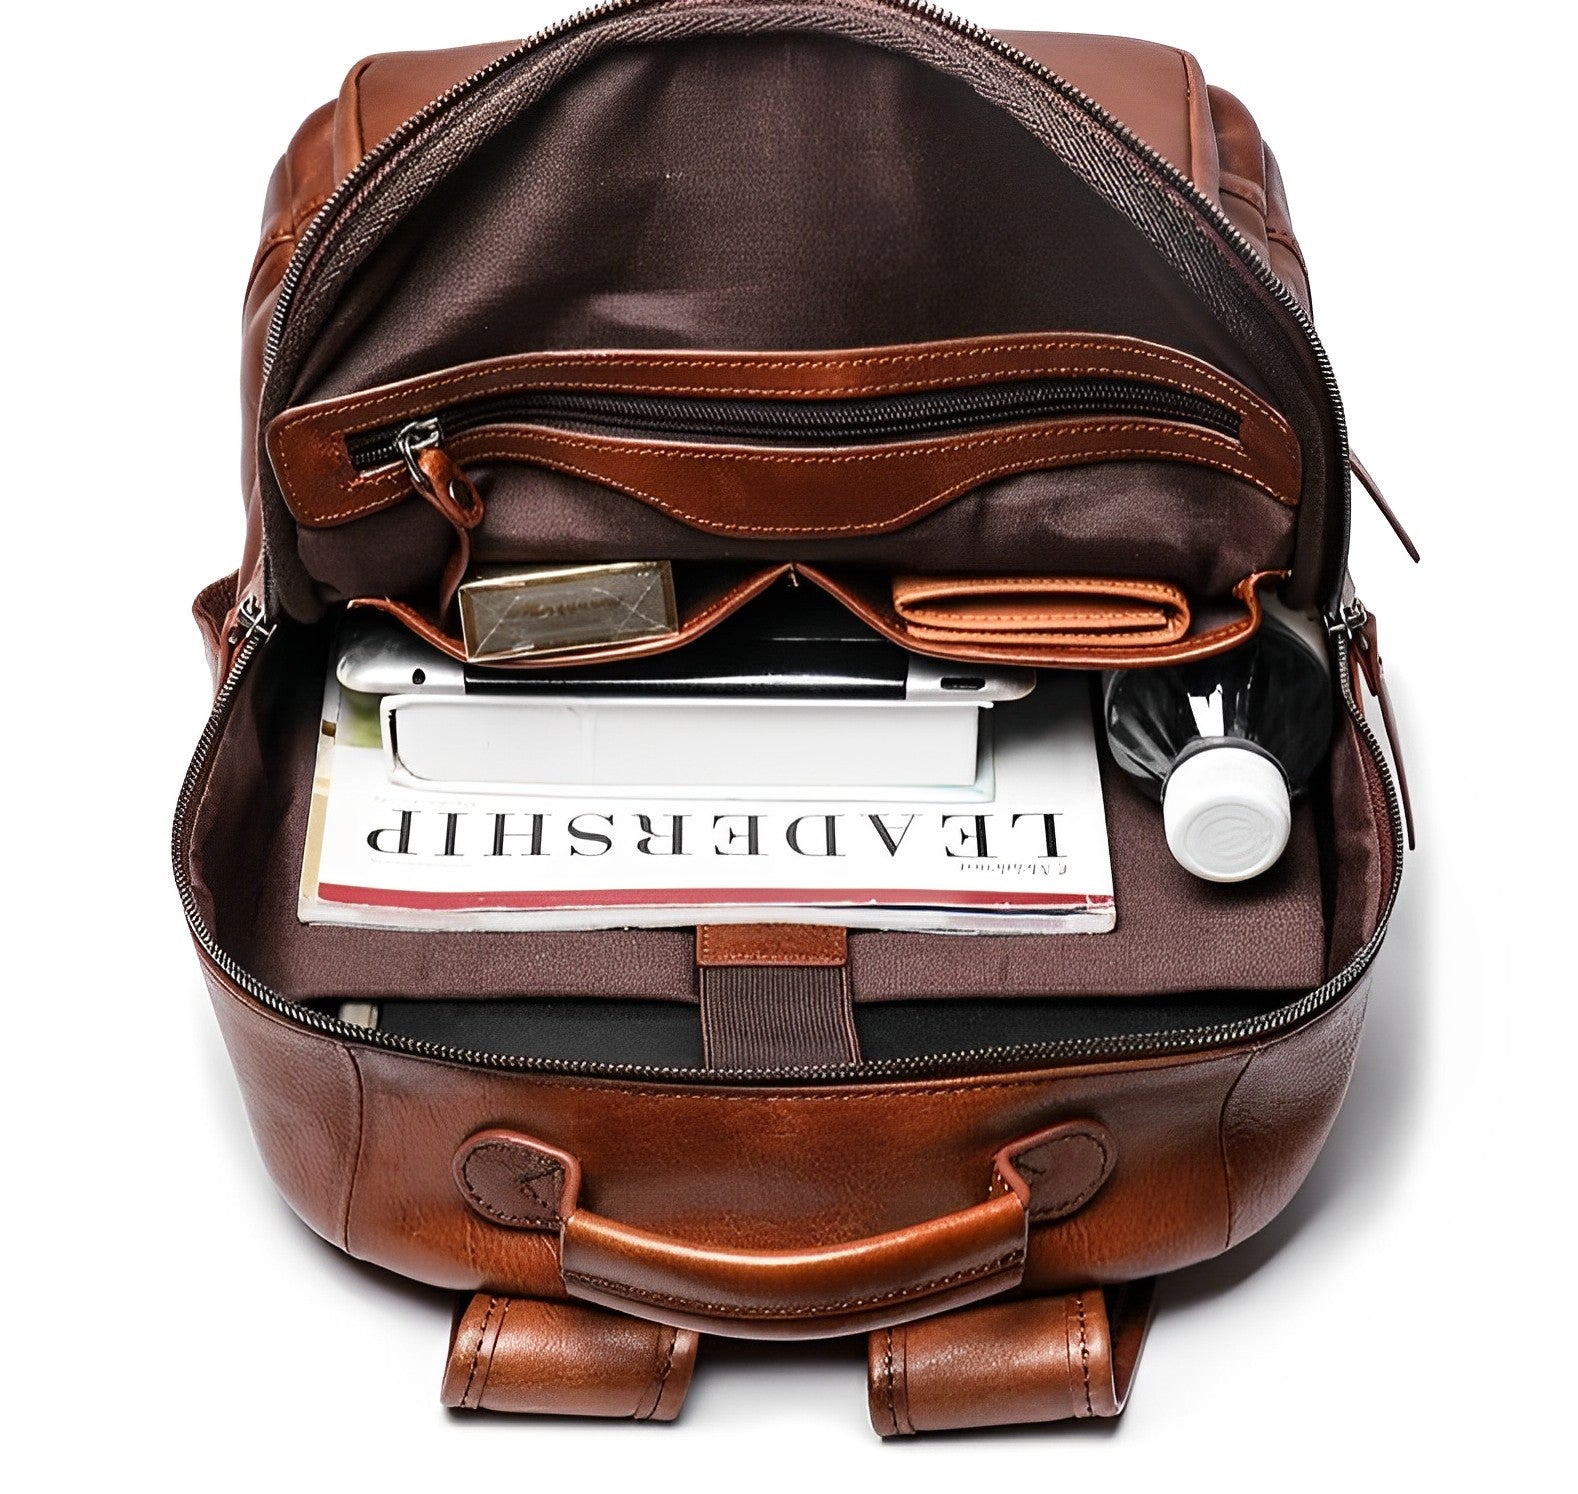 Bazgy Espresso: A Genuine Leather Backpack - BagzyBag